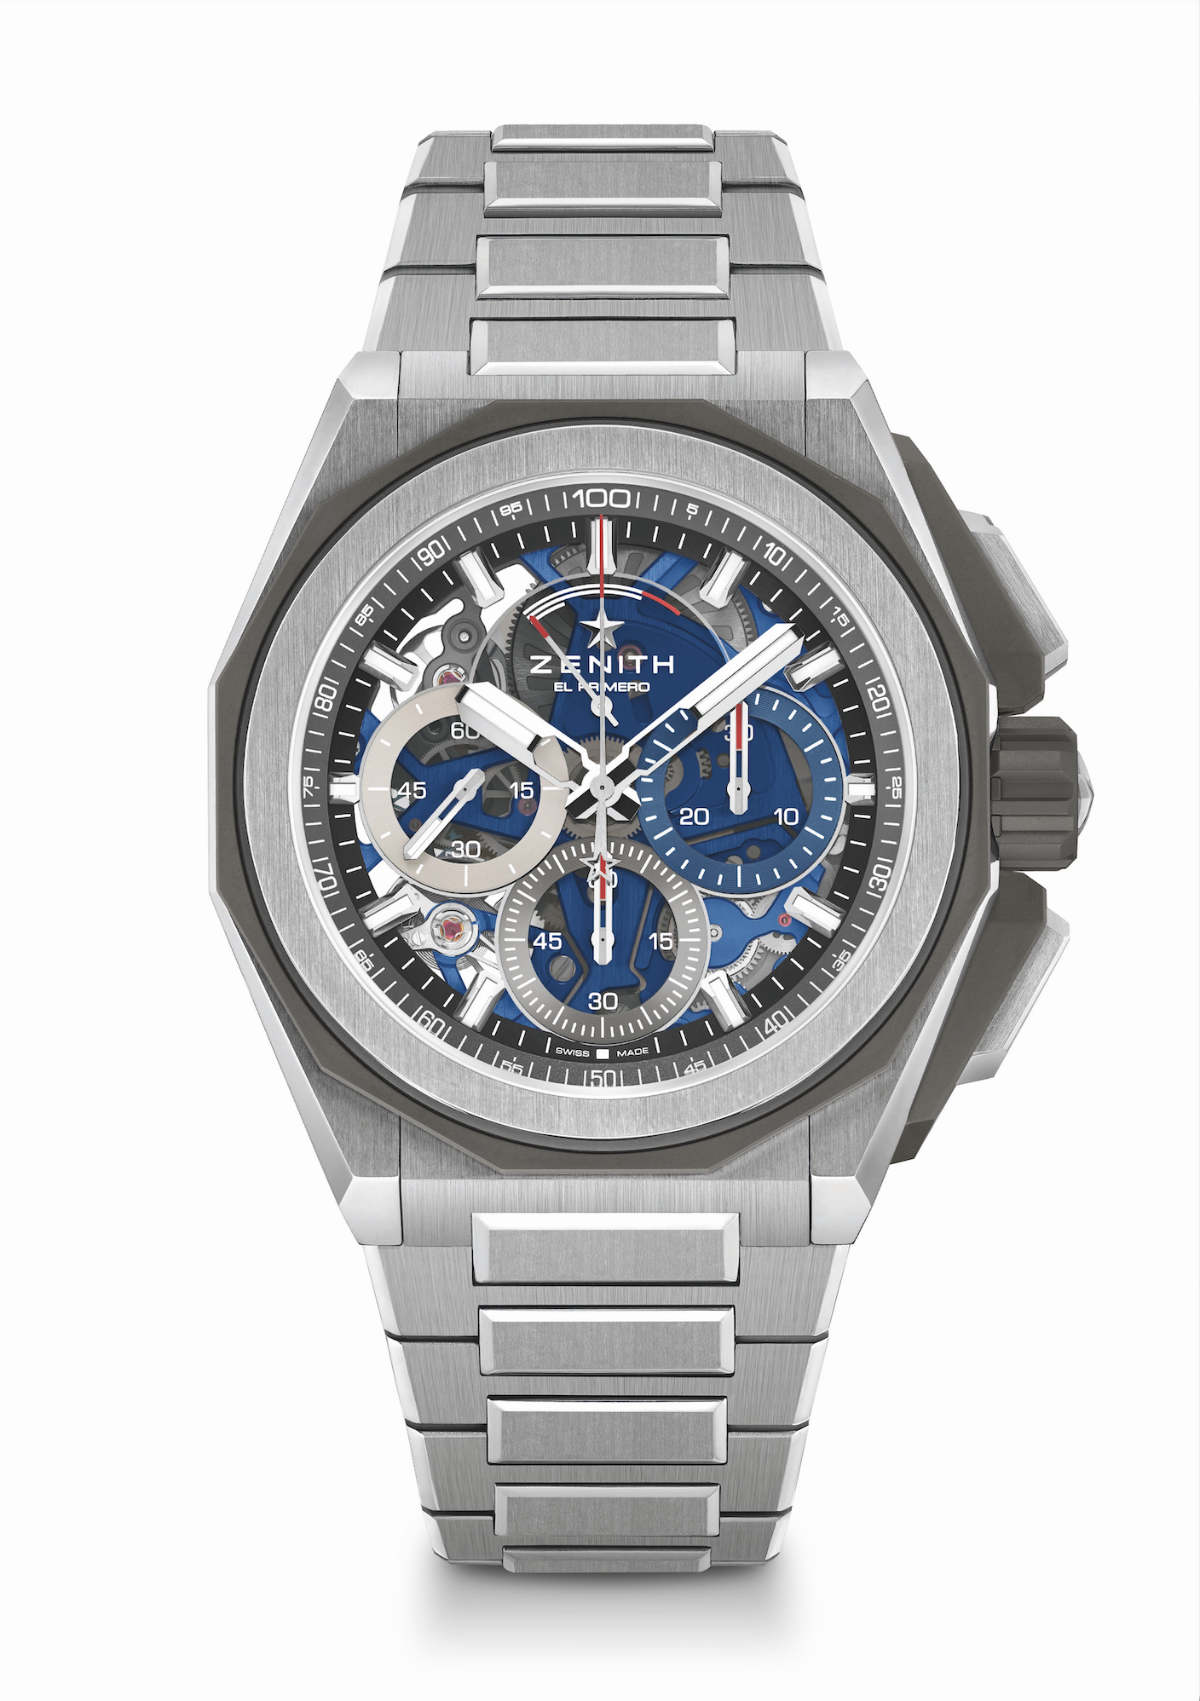 Built For The Elements: Zenith Introduces The Defy Extreme Collection